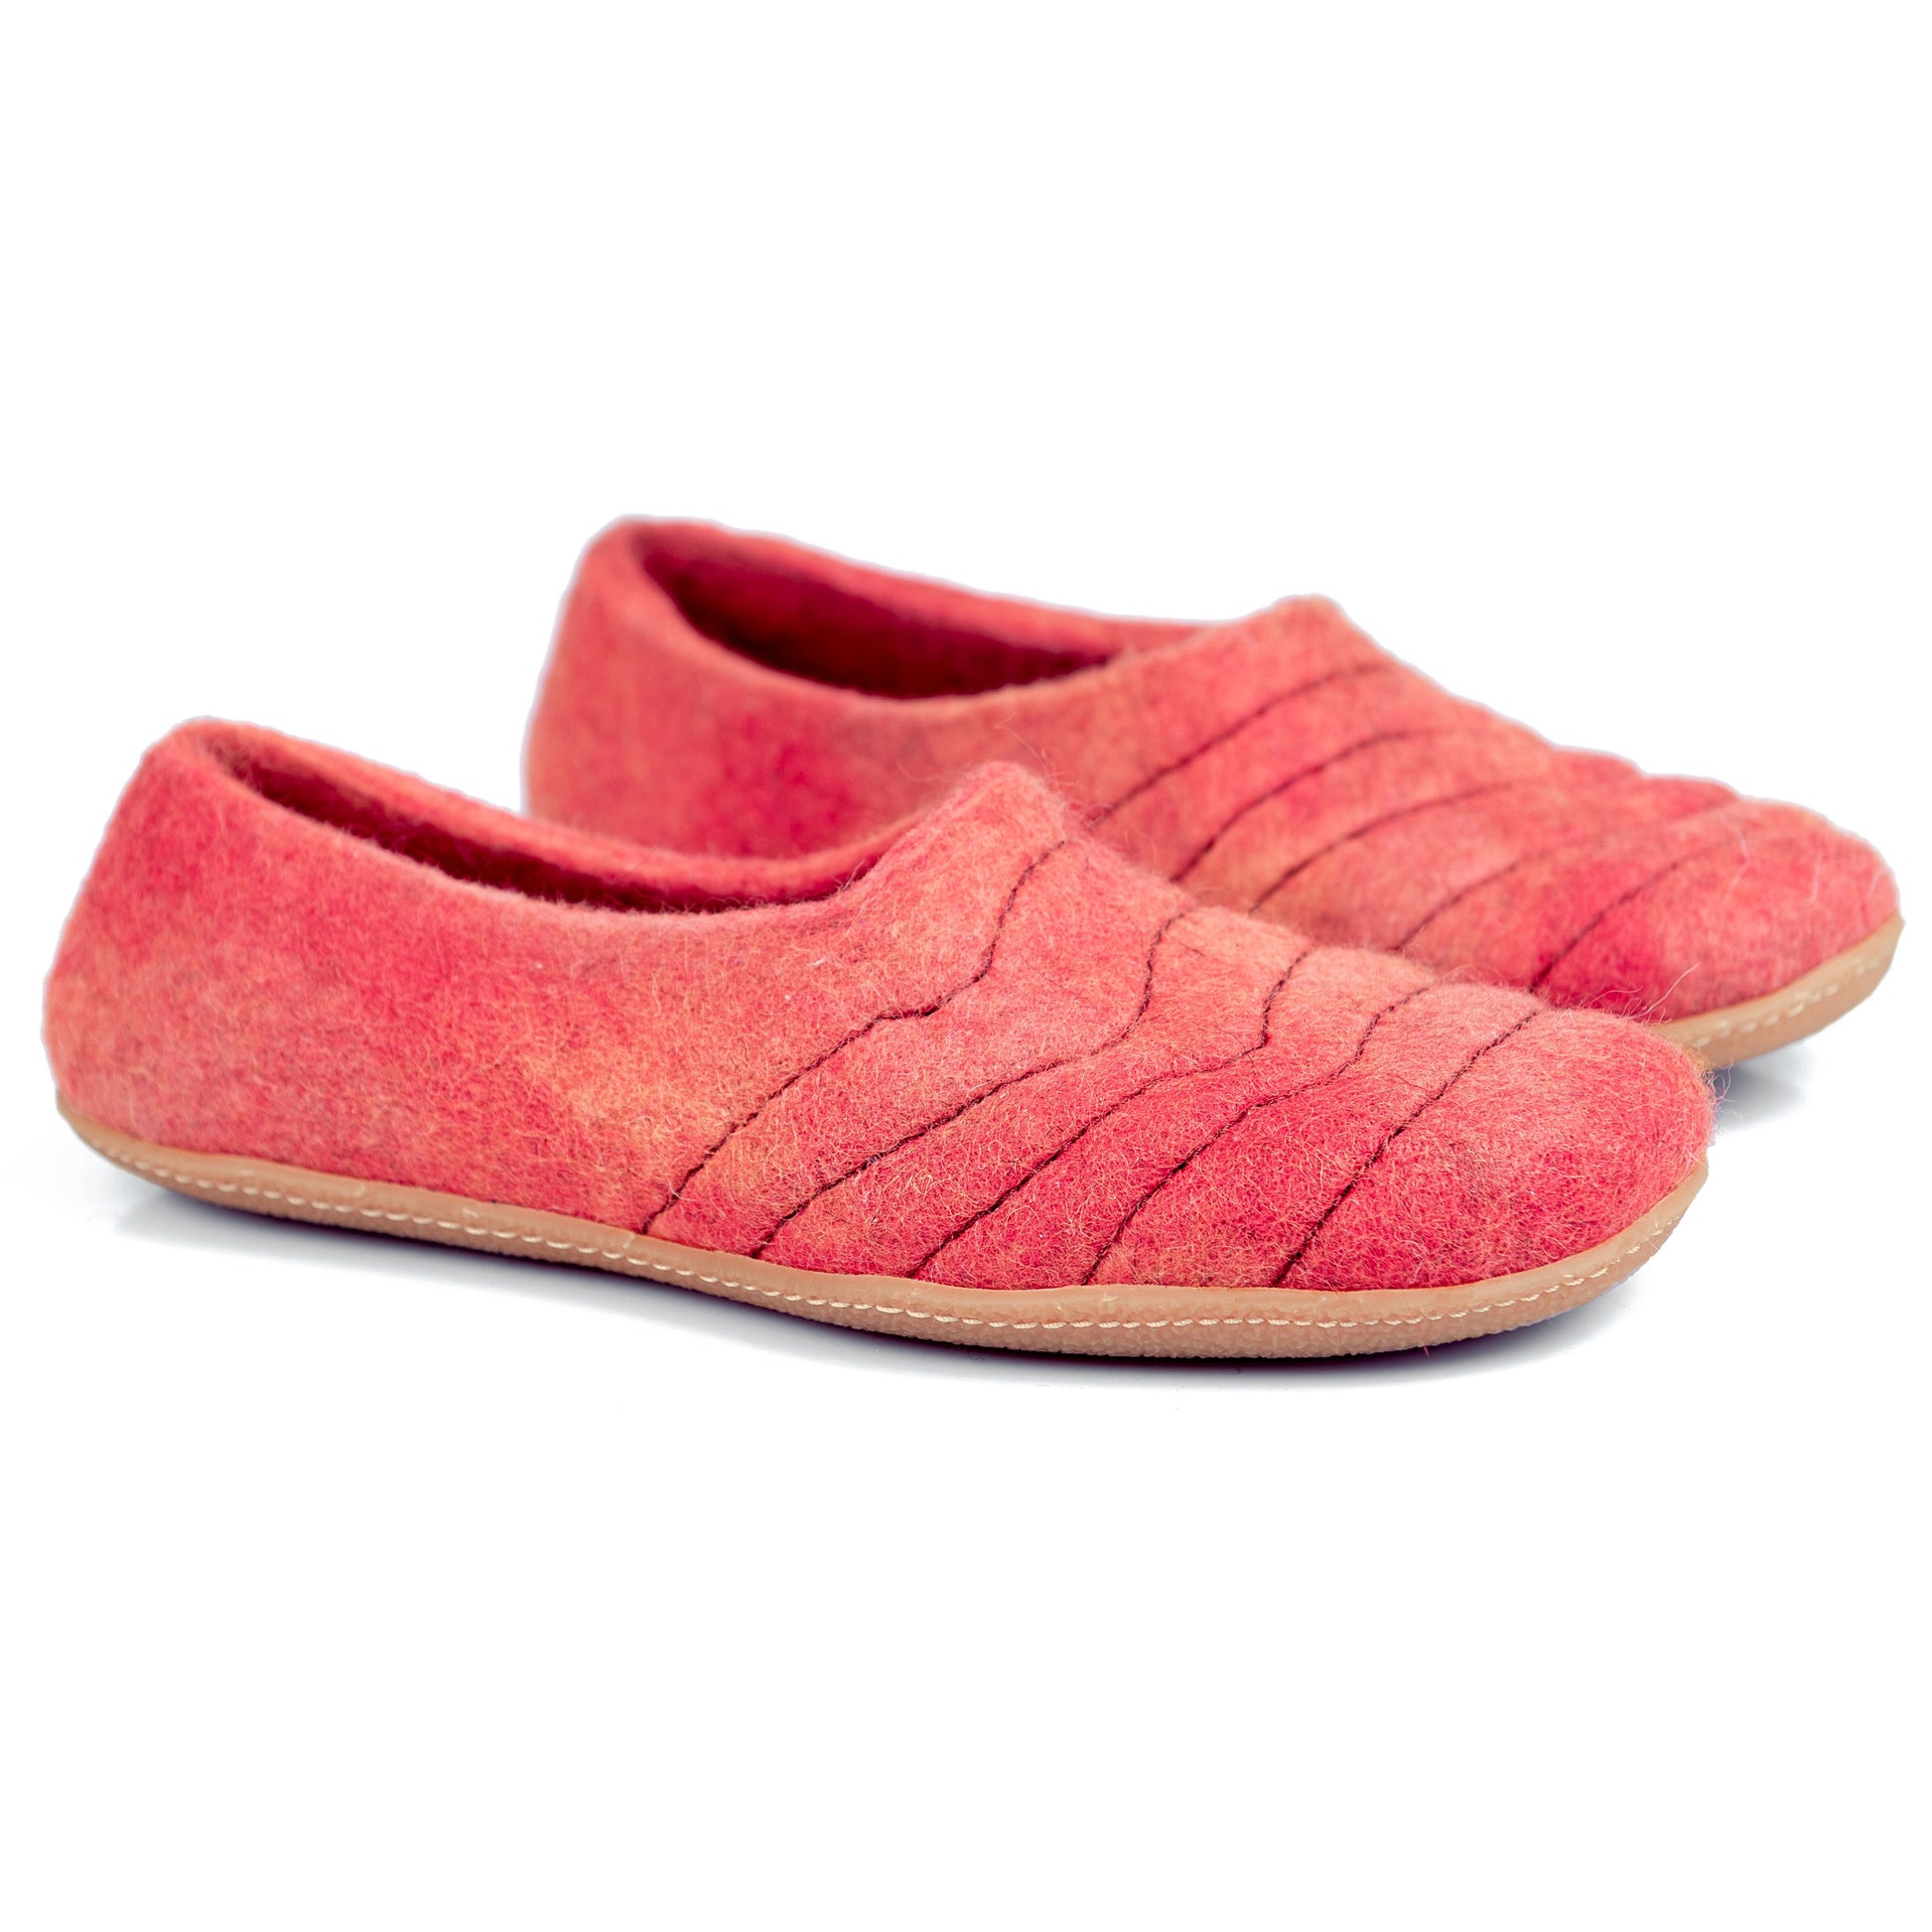 Coral Color Womens Felted Wool Clogs Style Slippers with Sturdy Stitching Decor